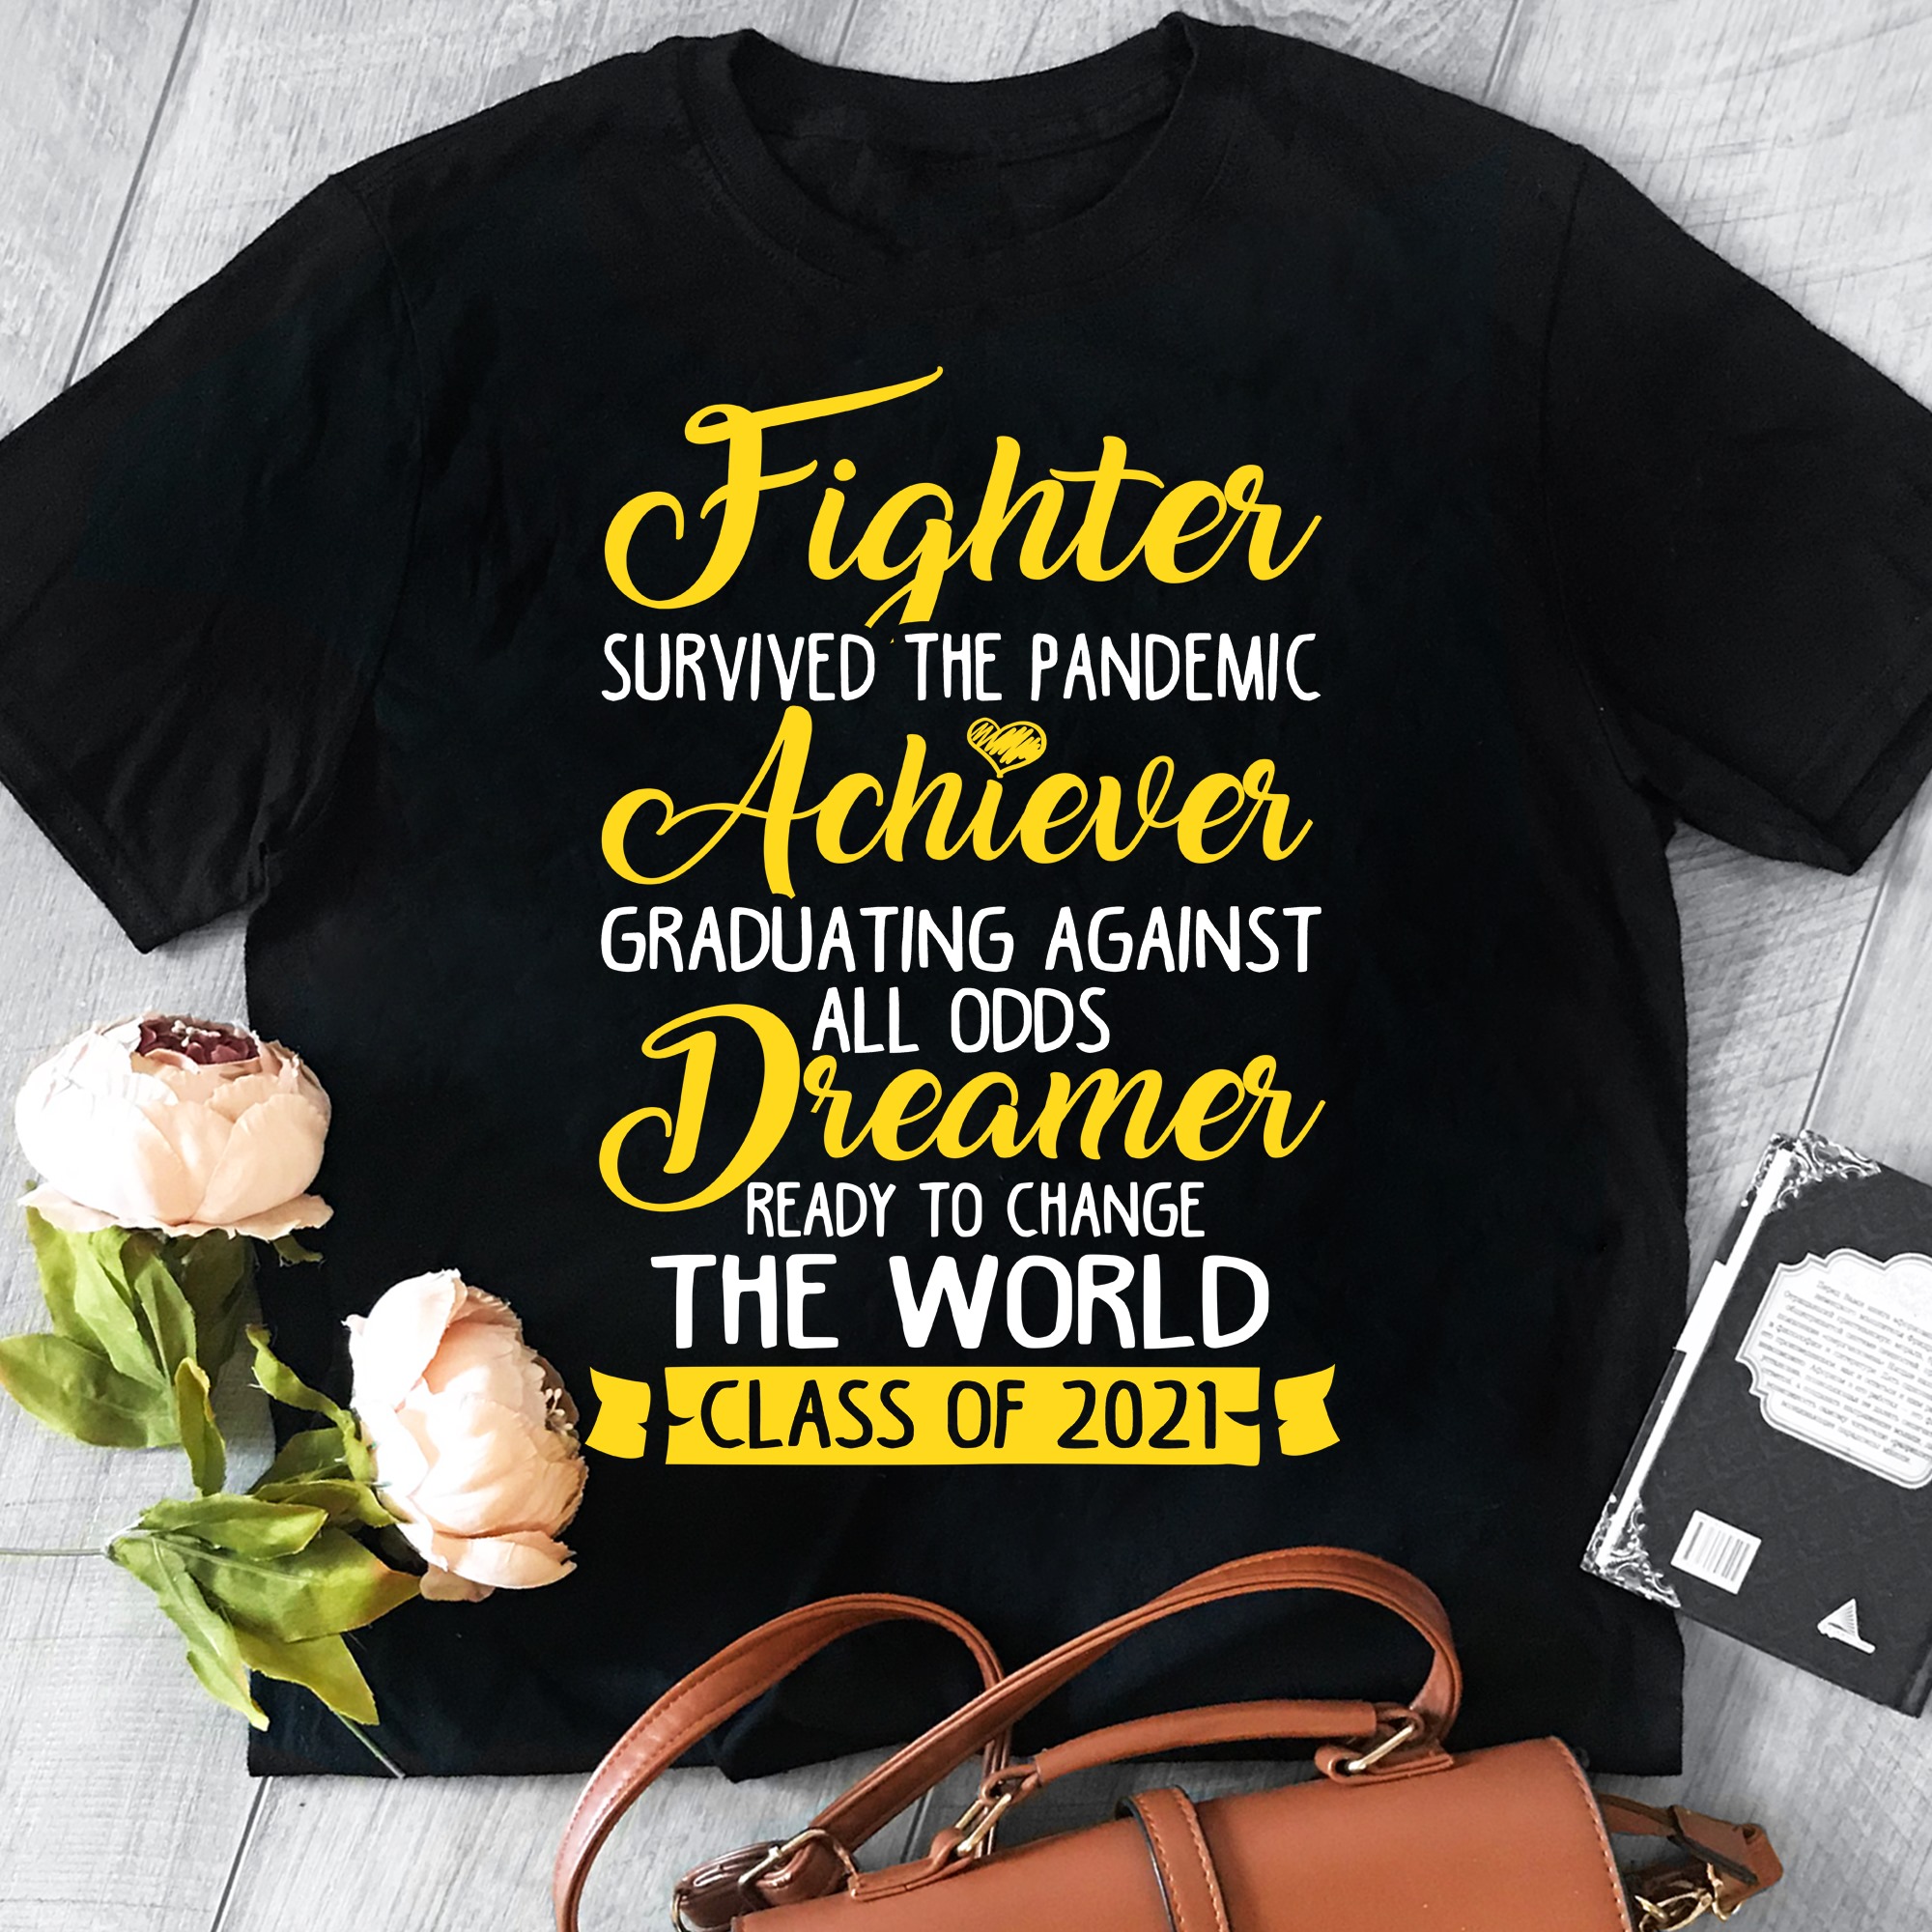 Fighter survived the pandemic Achiever graduating against all odds Dreamer ready to change the world